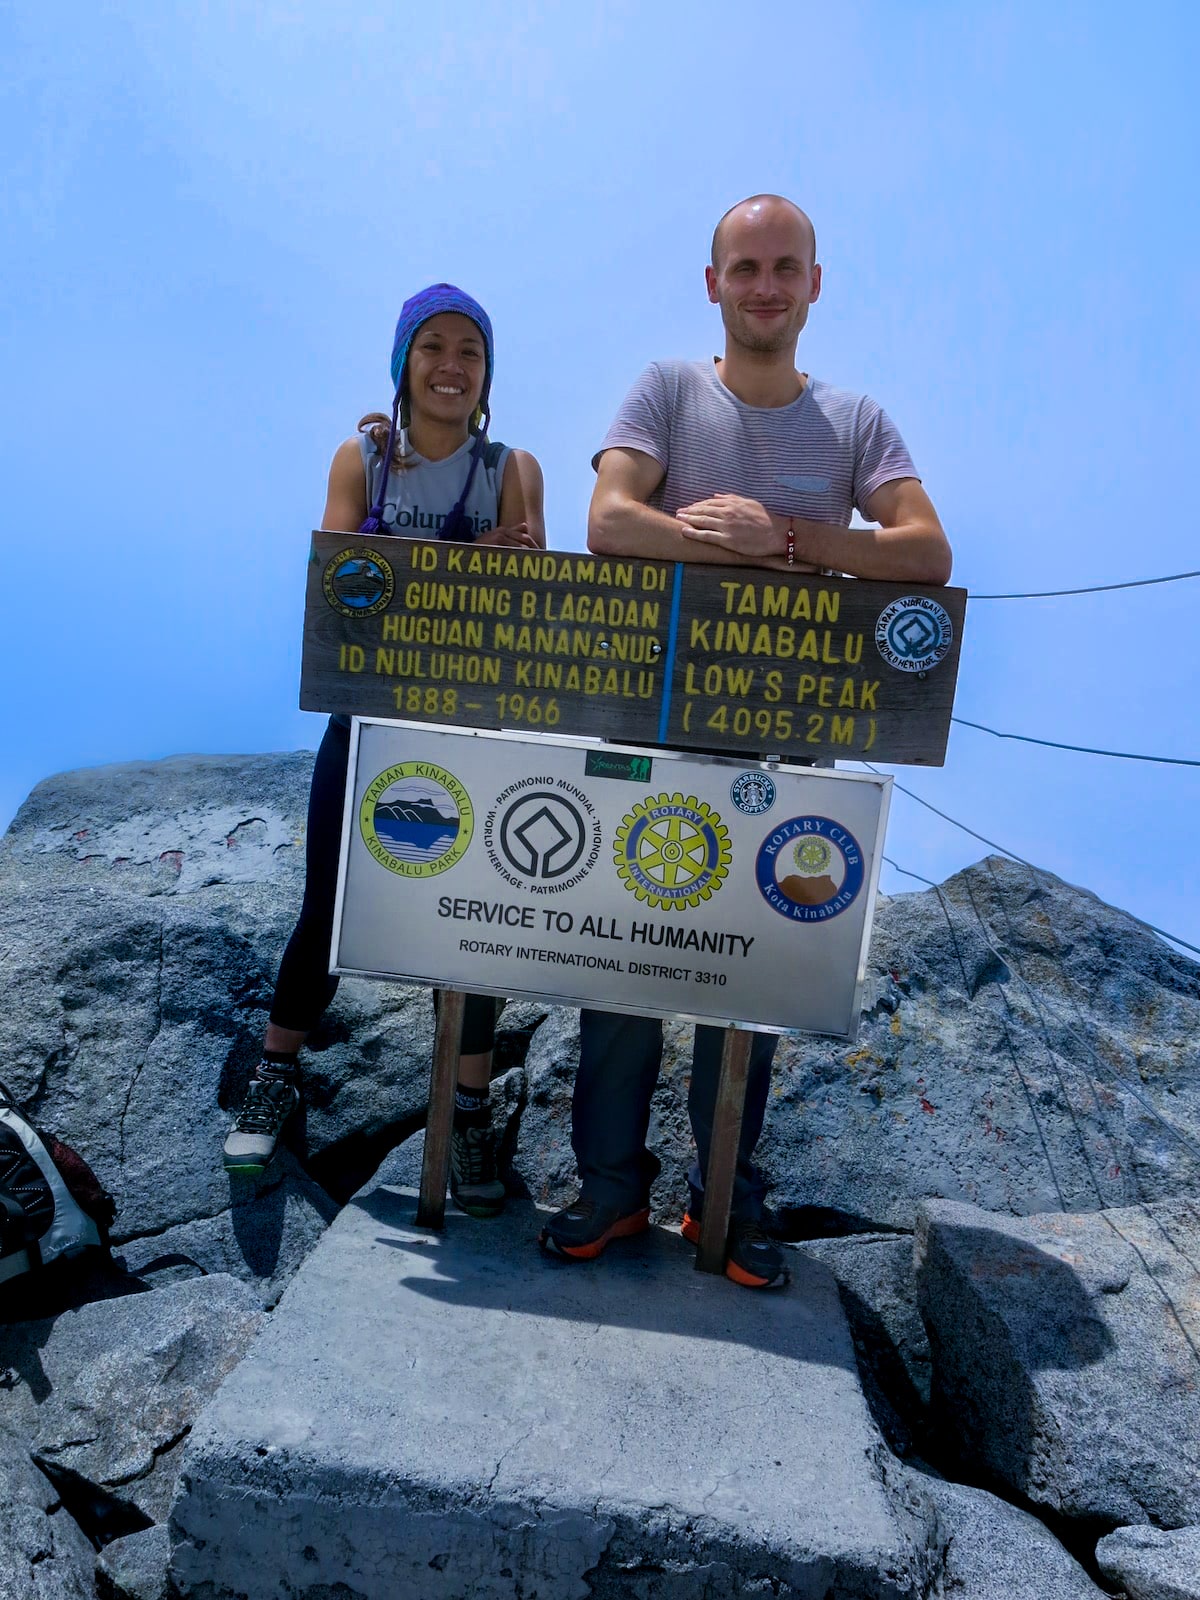 A man and a woman smile as they lean on a signpost on top of a mountain.